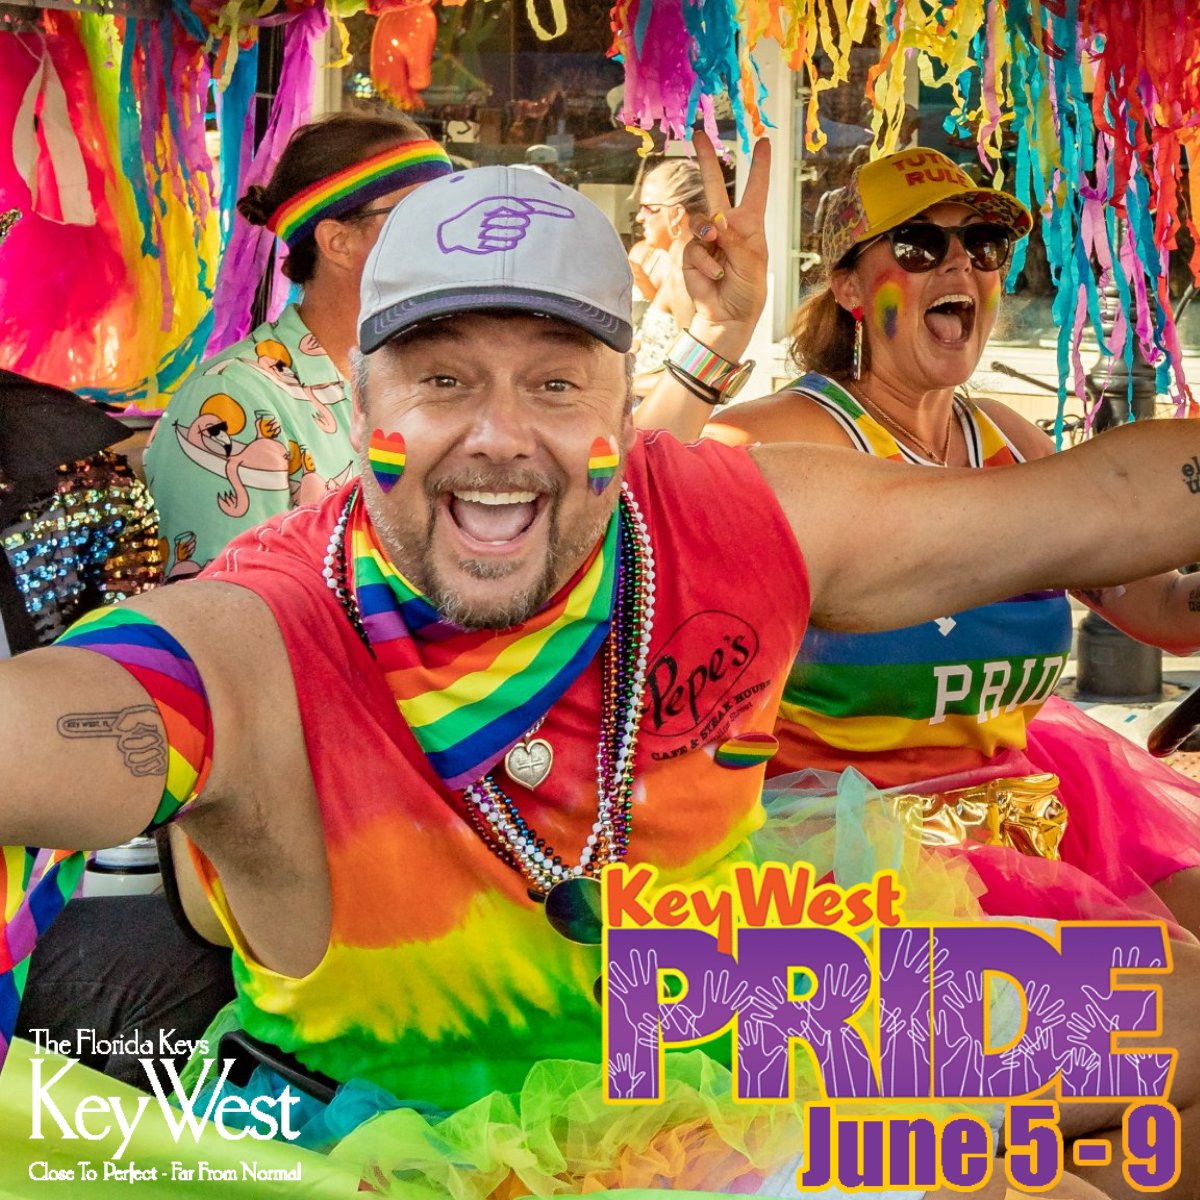 Only one month till Key West Pride!! 🏳️‍🌈💕🤩 Click here for the full schedule! bit.ly/3IElPkt